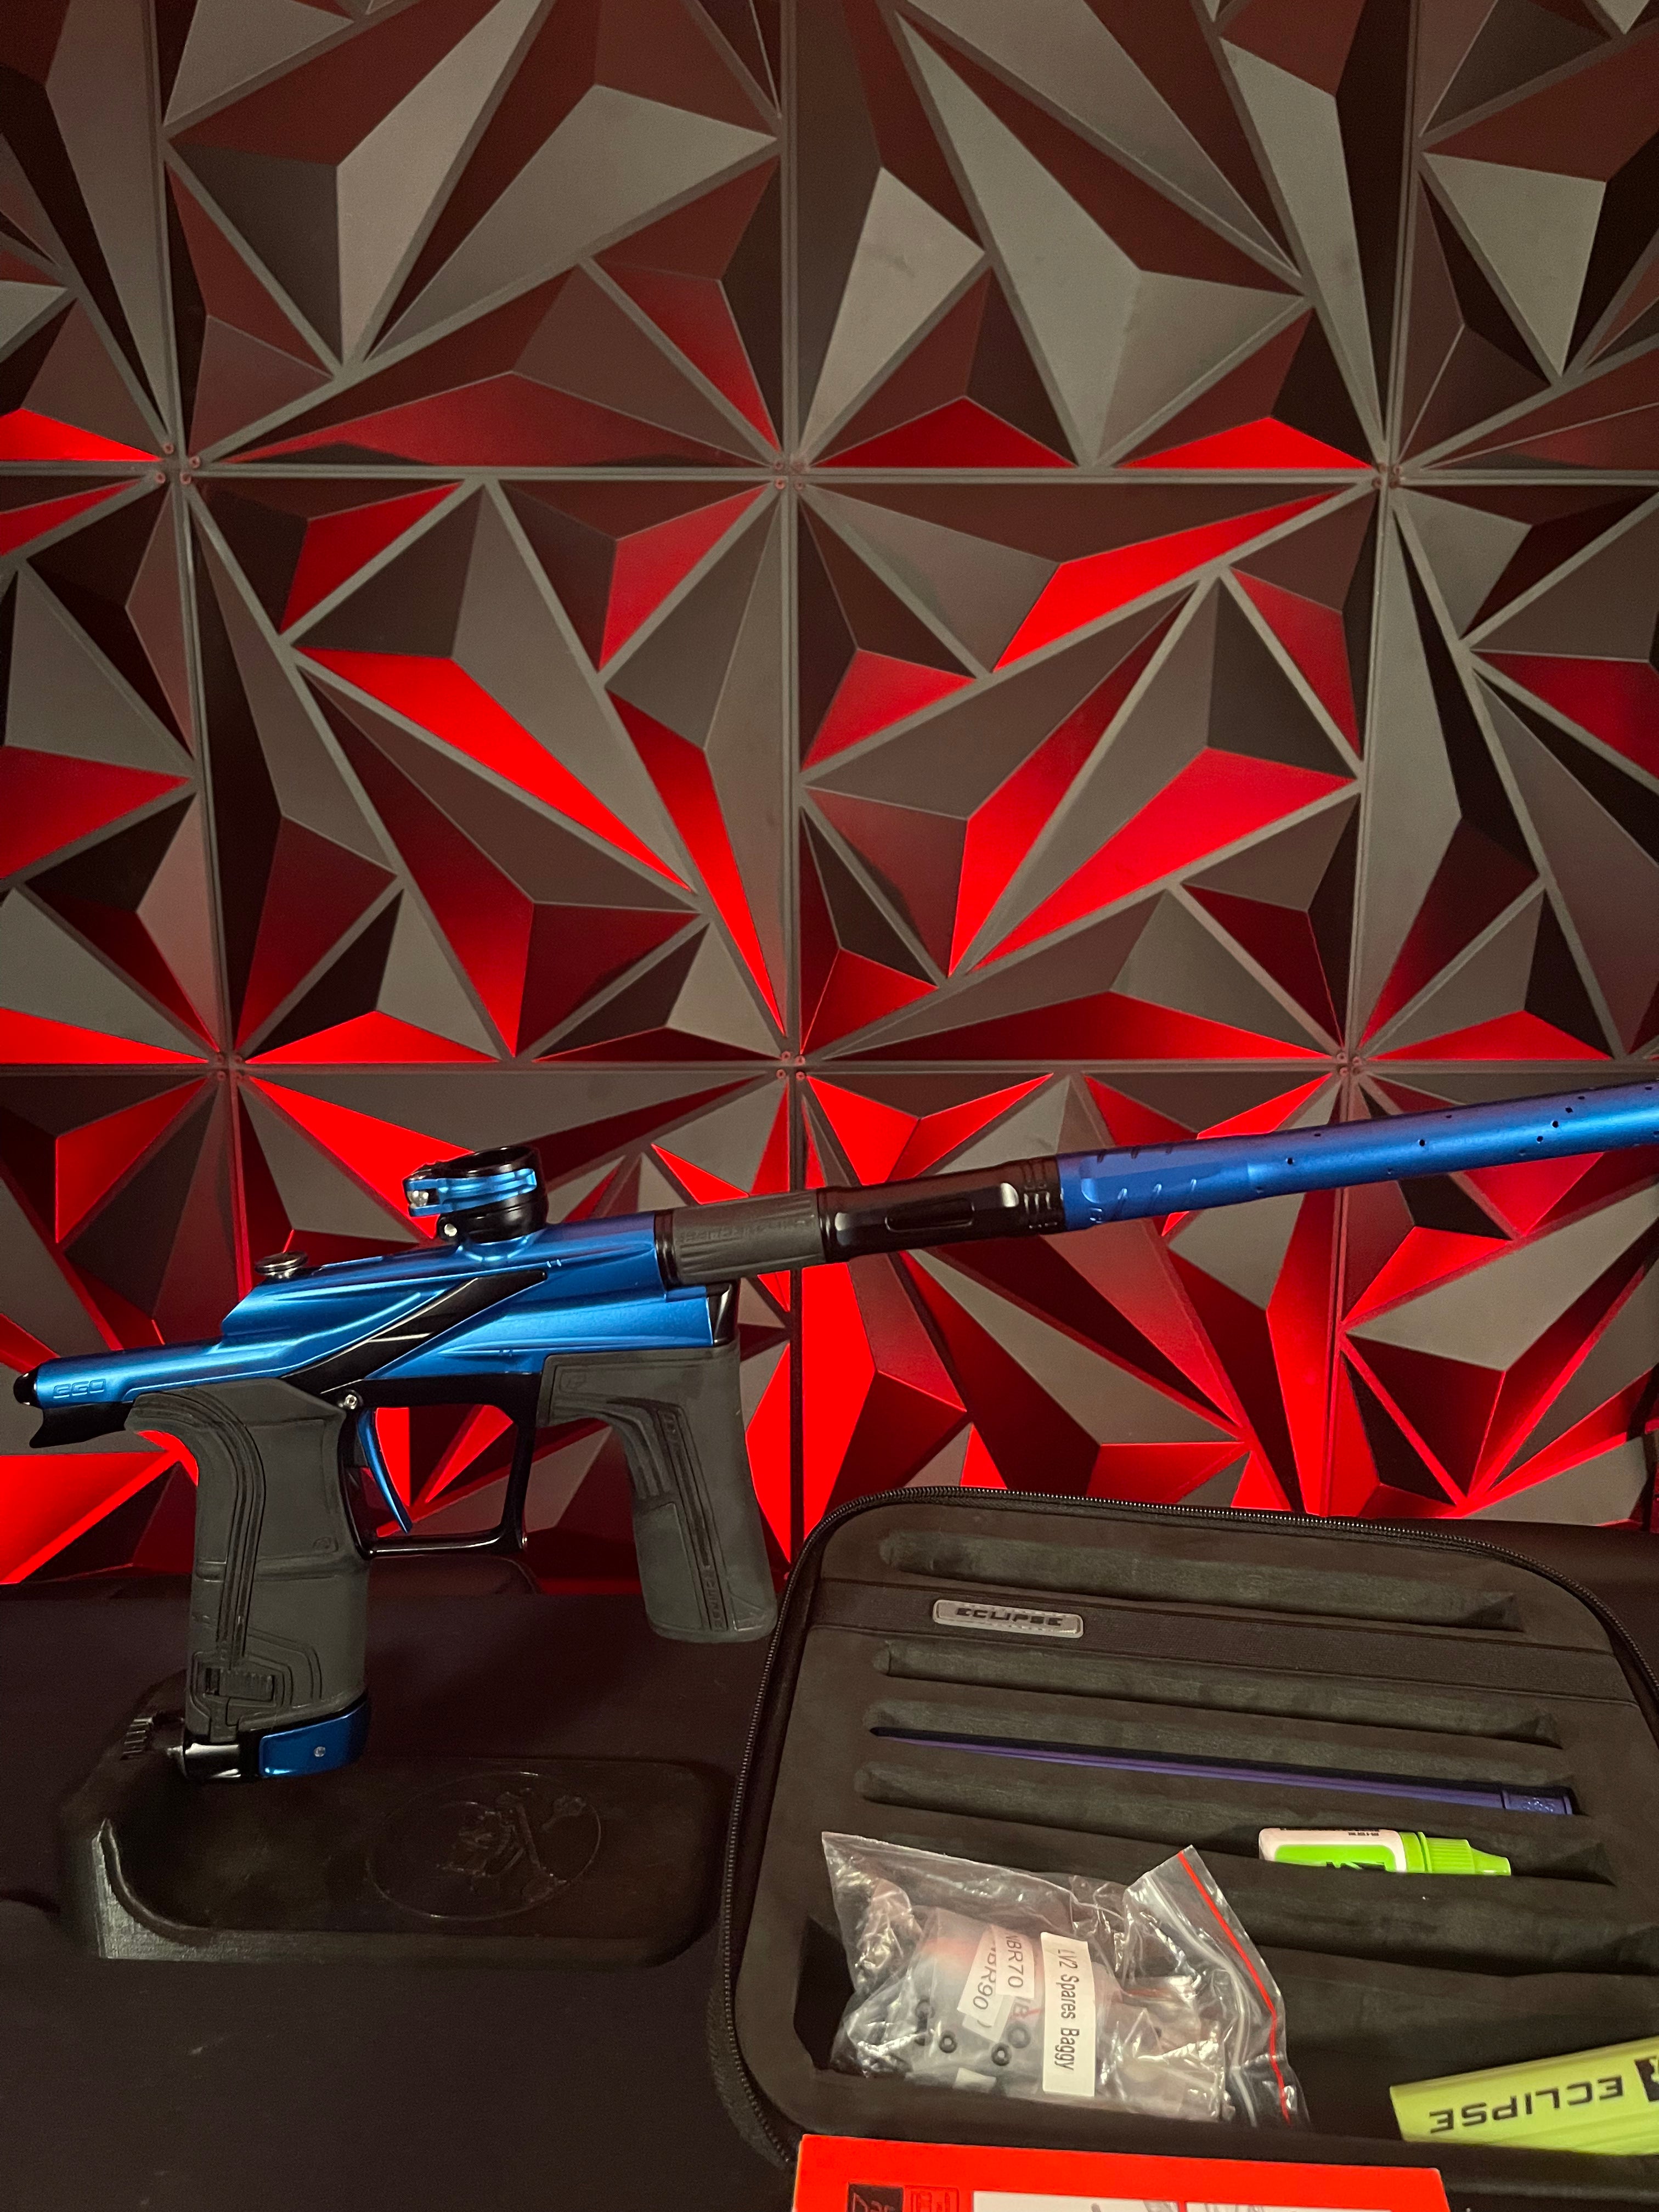 The Eclipse LV2 : Most Popular Electronic Paintball Markers